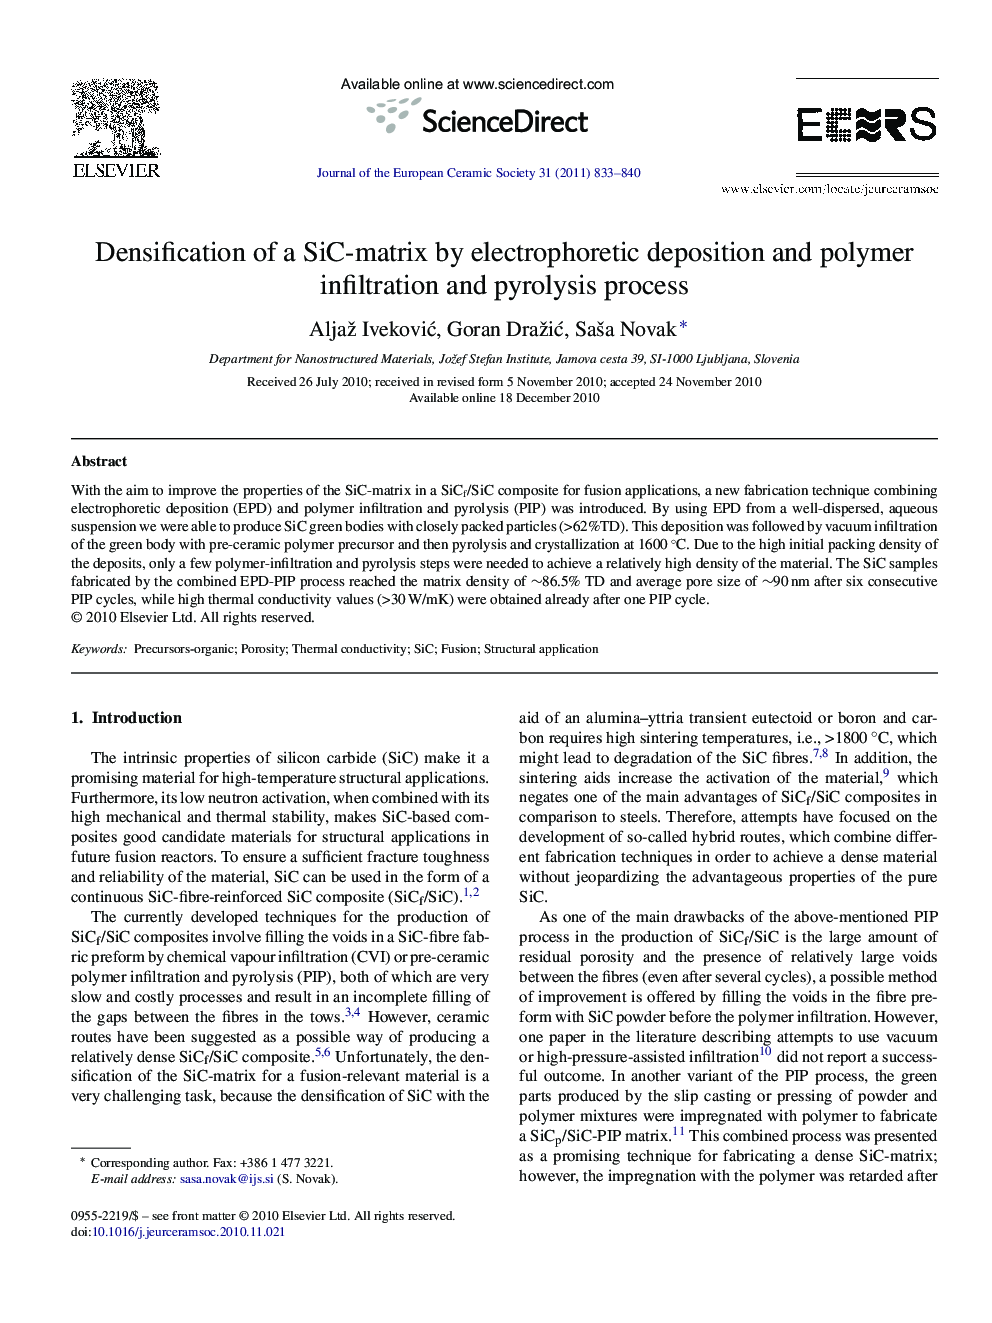 Densification of a SiC-matrix by electrophoretic deposition and polymer infiltration and pyrolysis process